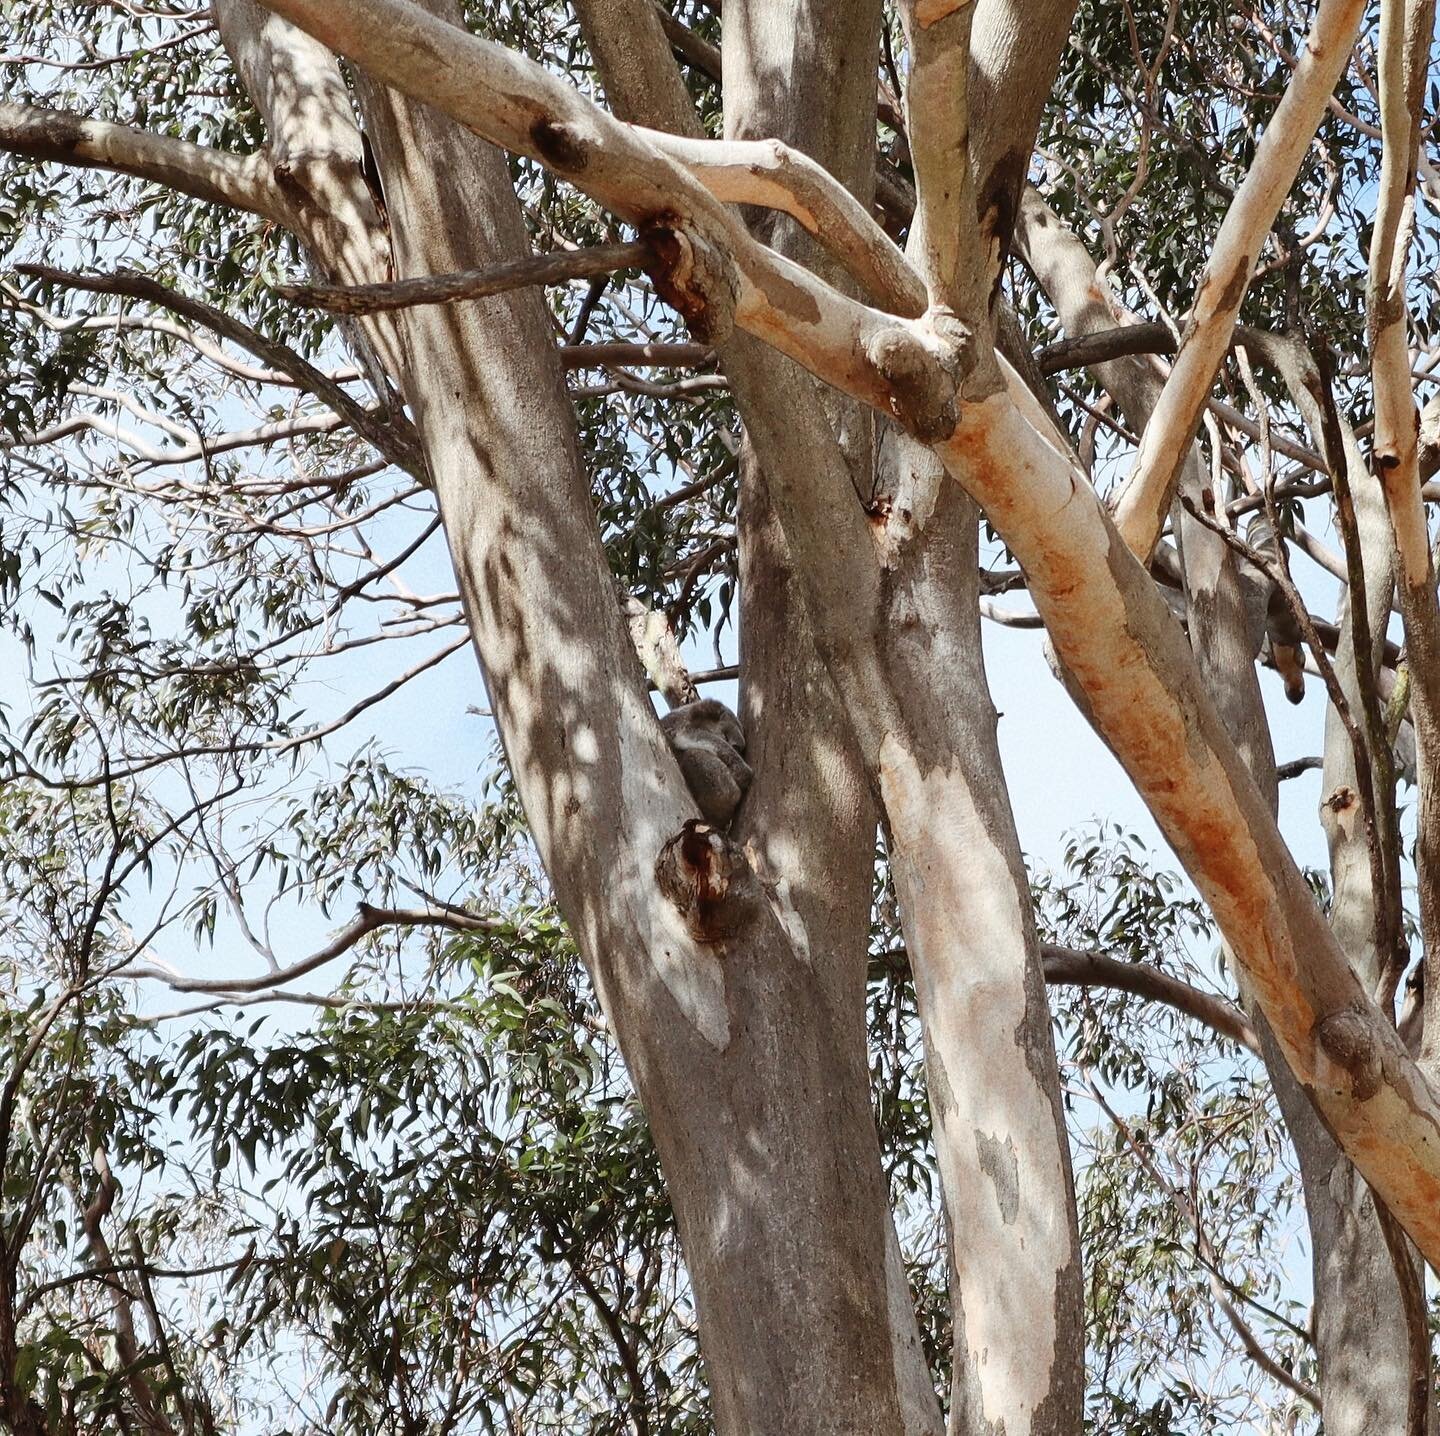 Since 2015 we&rsquo;ve been counting &amp; marking the locations of koalas seen on the property

Yesterday we hit the 200th koala sighting! 🐨🌿

#koala #bear #australia #sydney #adventure #camp #wcc